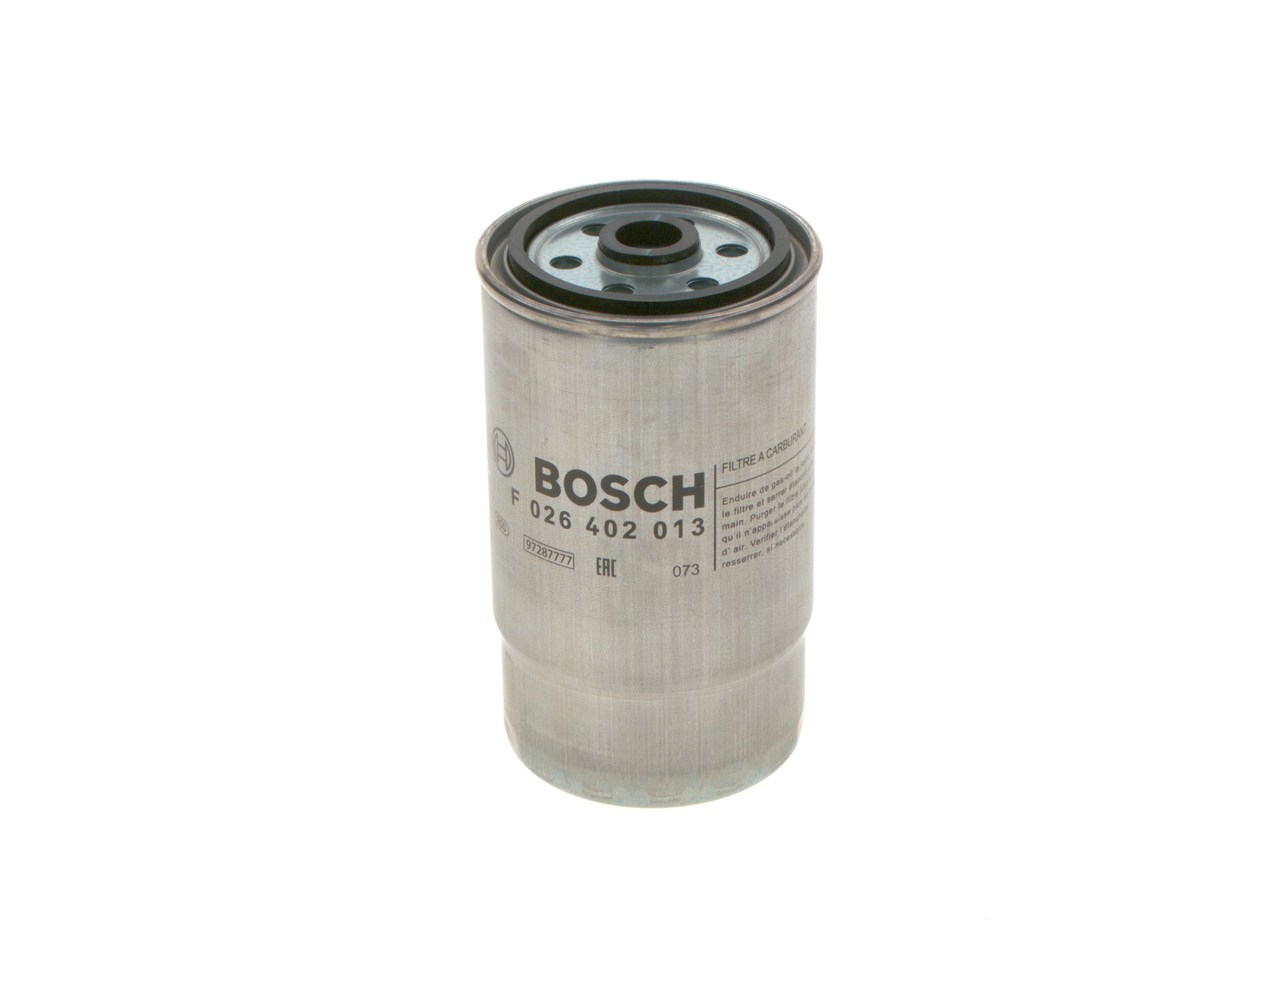 F026402013, Fuel Filter, BOSCH, 1906C2, 5021185195, 71771370, 9P918260, 190693, 190694, 77362258, 24.H2O.05, 5130, ALG2179, CS726, DNW1998, EFF200, ELG5305, FP5776EWS, H161WK, HDF510, KC196, L407, M614, PP9684, PS10098EWS, RN264, S5H2ONR, SP1342, WF8329, WK854/4, 24H2005, WK8544, WK854/6